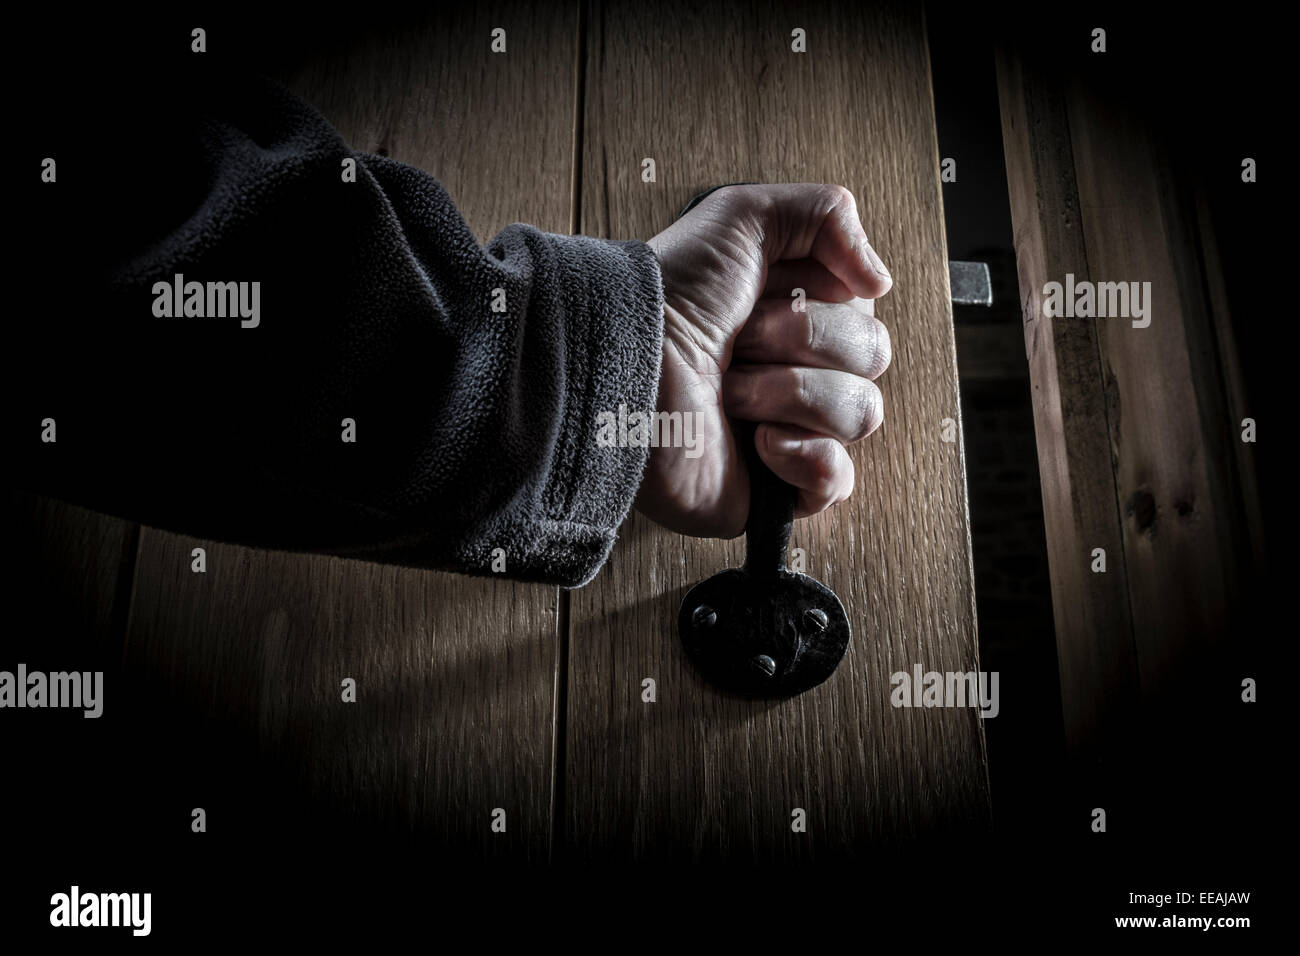 A man's hand opening a door into a dark room. Stock Photo